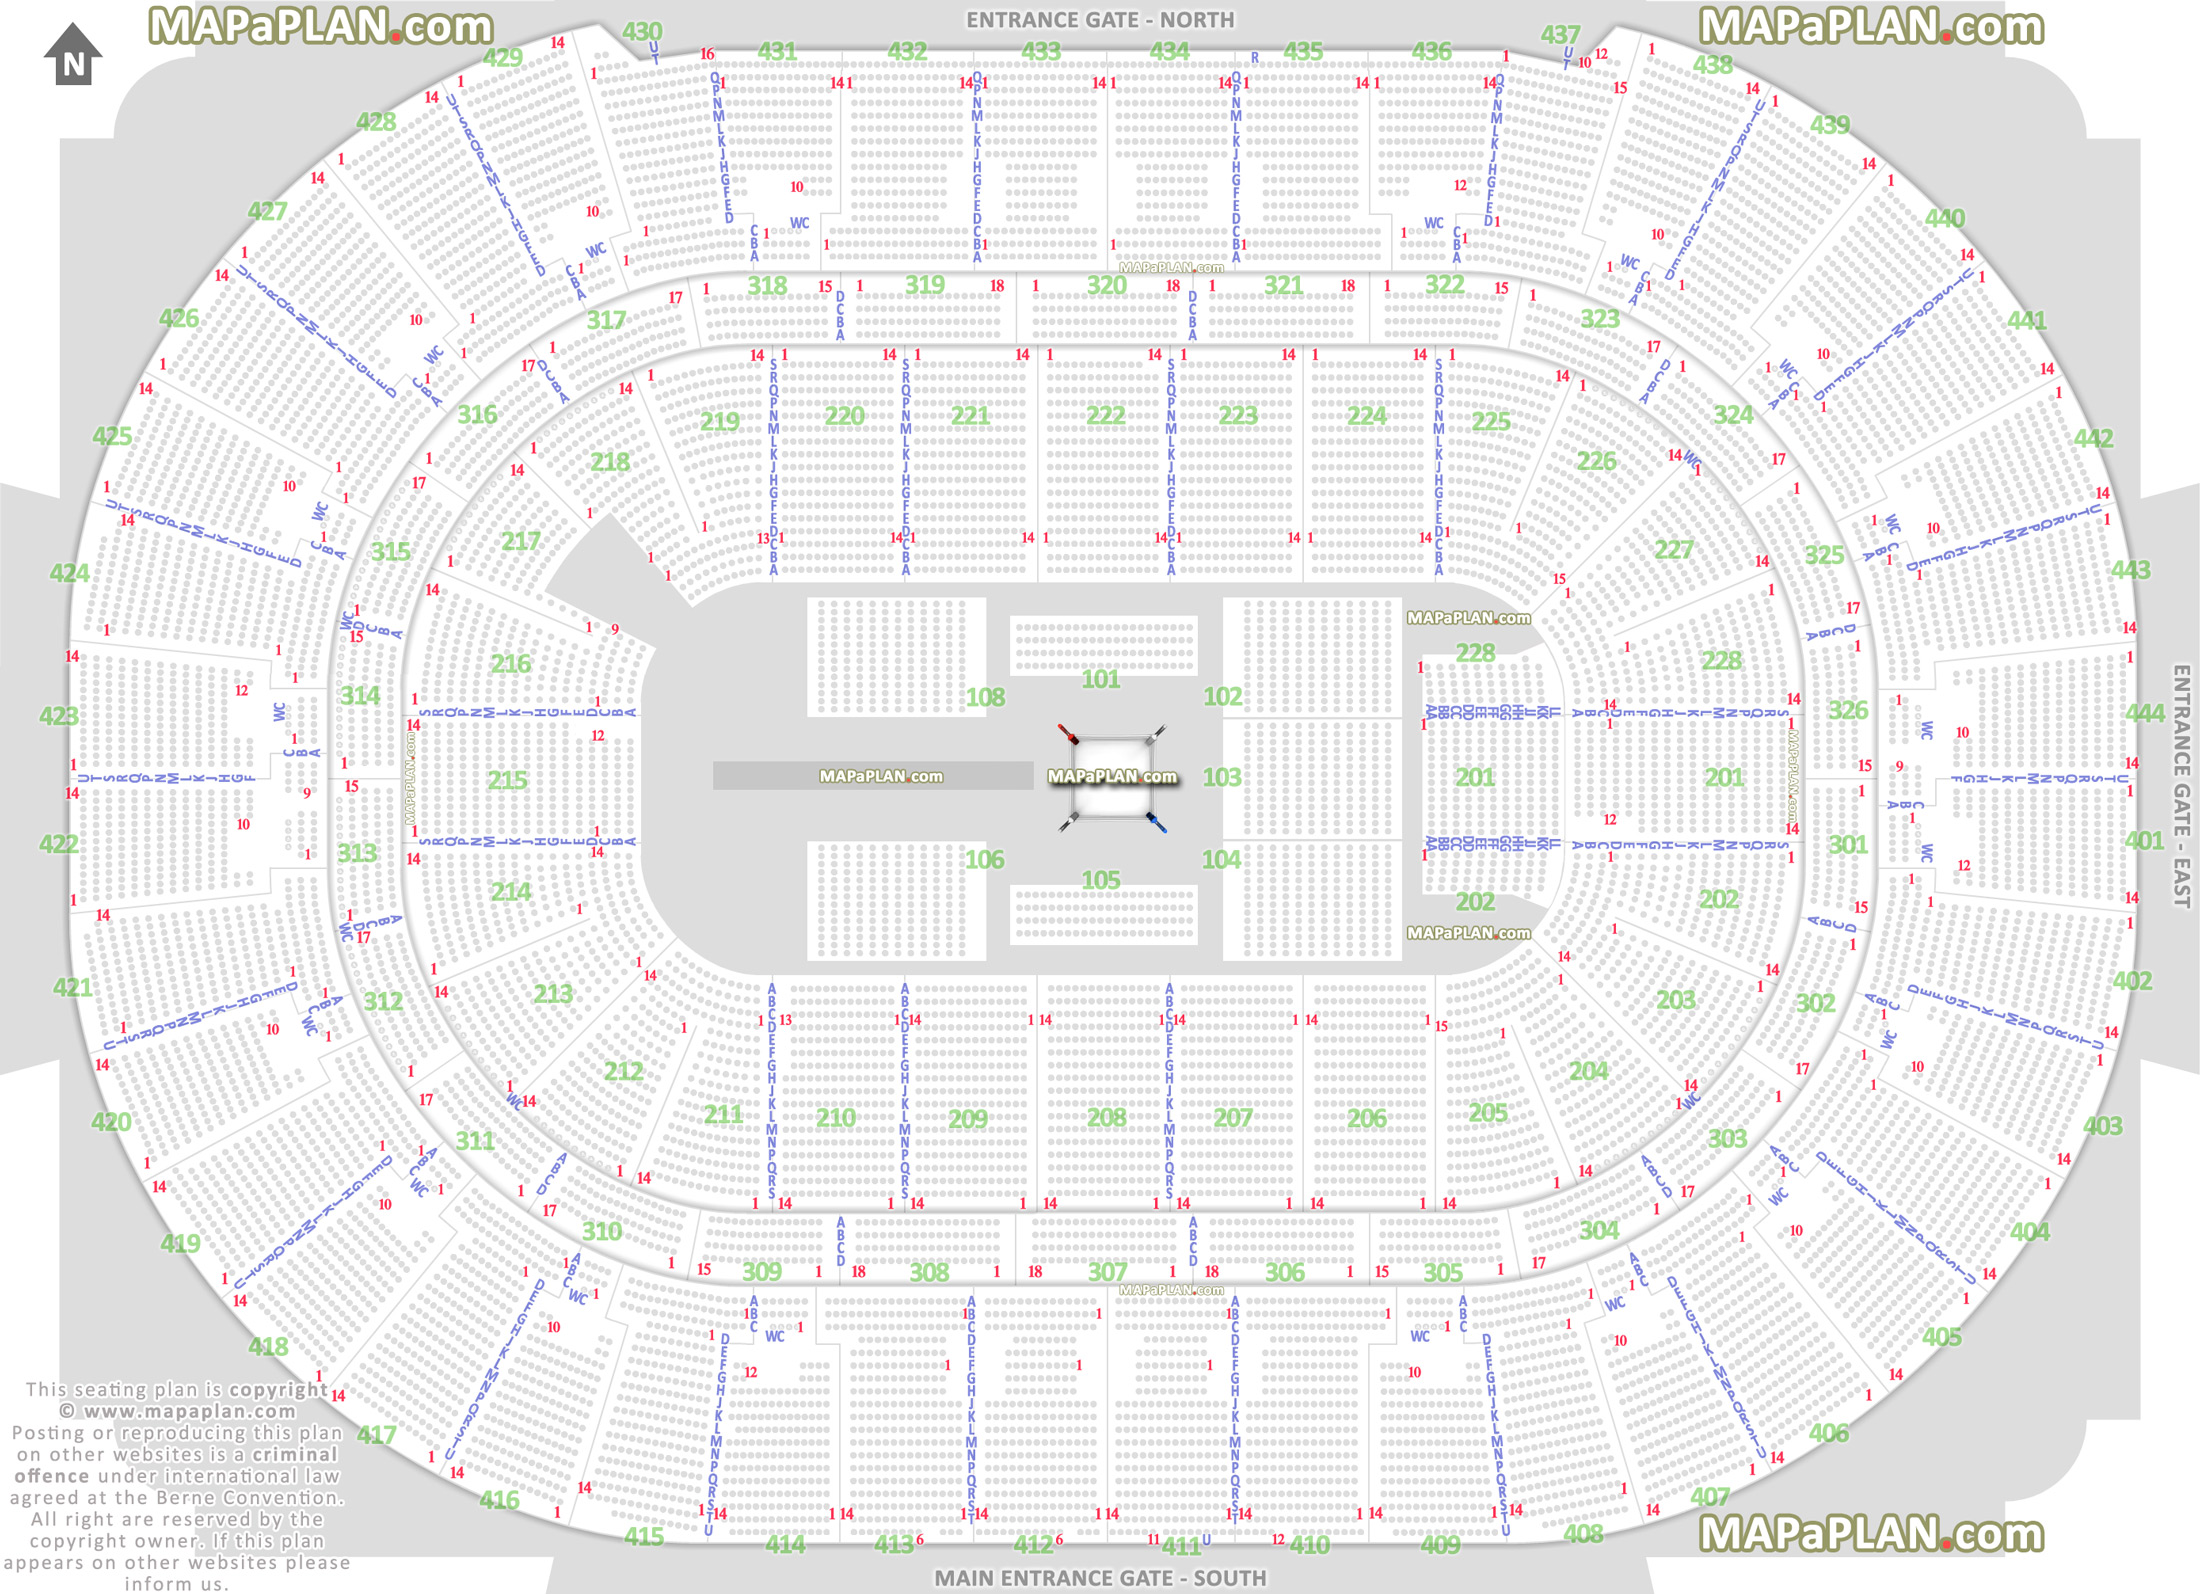 wwe raw smackdown live wrestling boxing match events 360 round ring stage configuration good bad worst side seats pacific premier bank club level Anaheim Honda Center seating chart